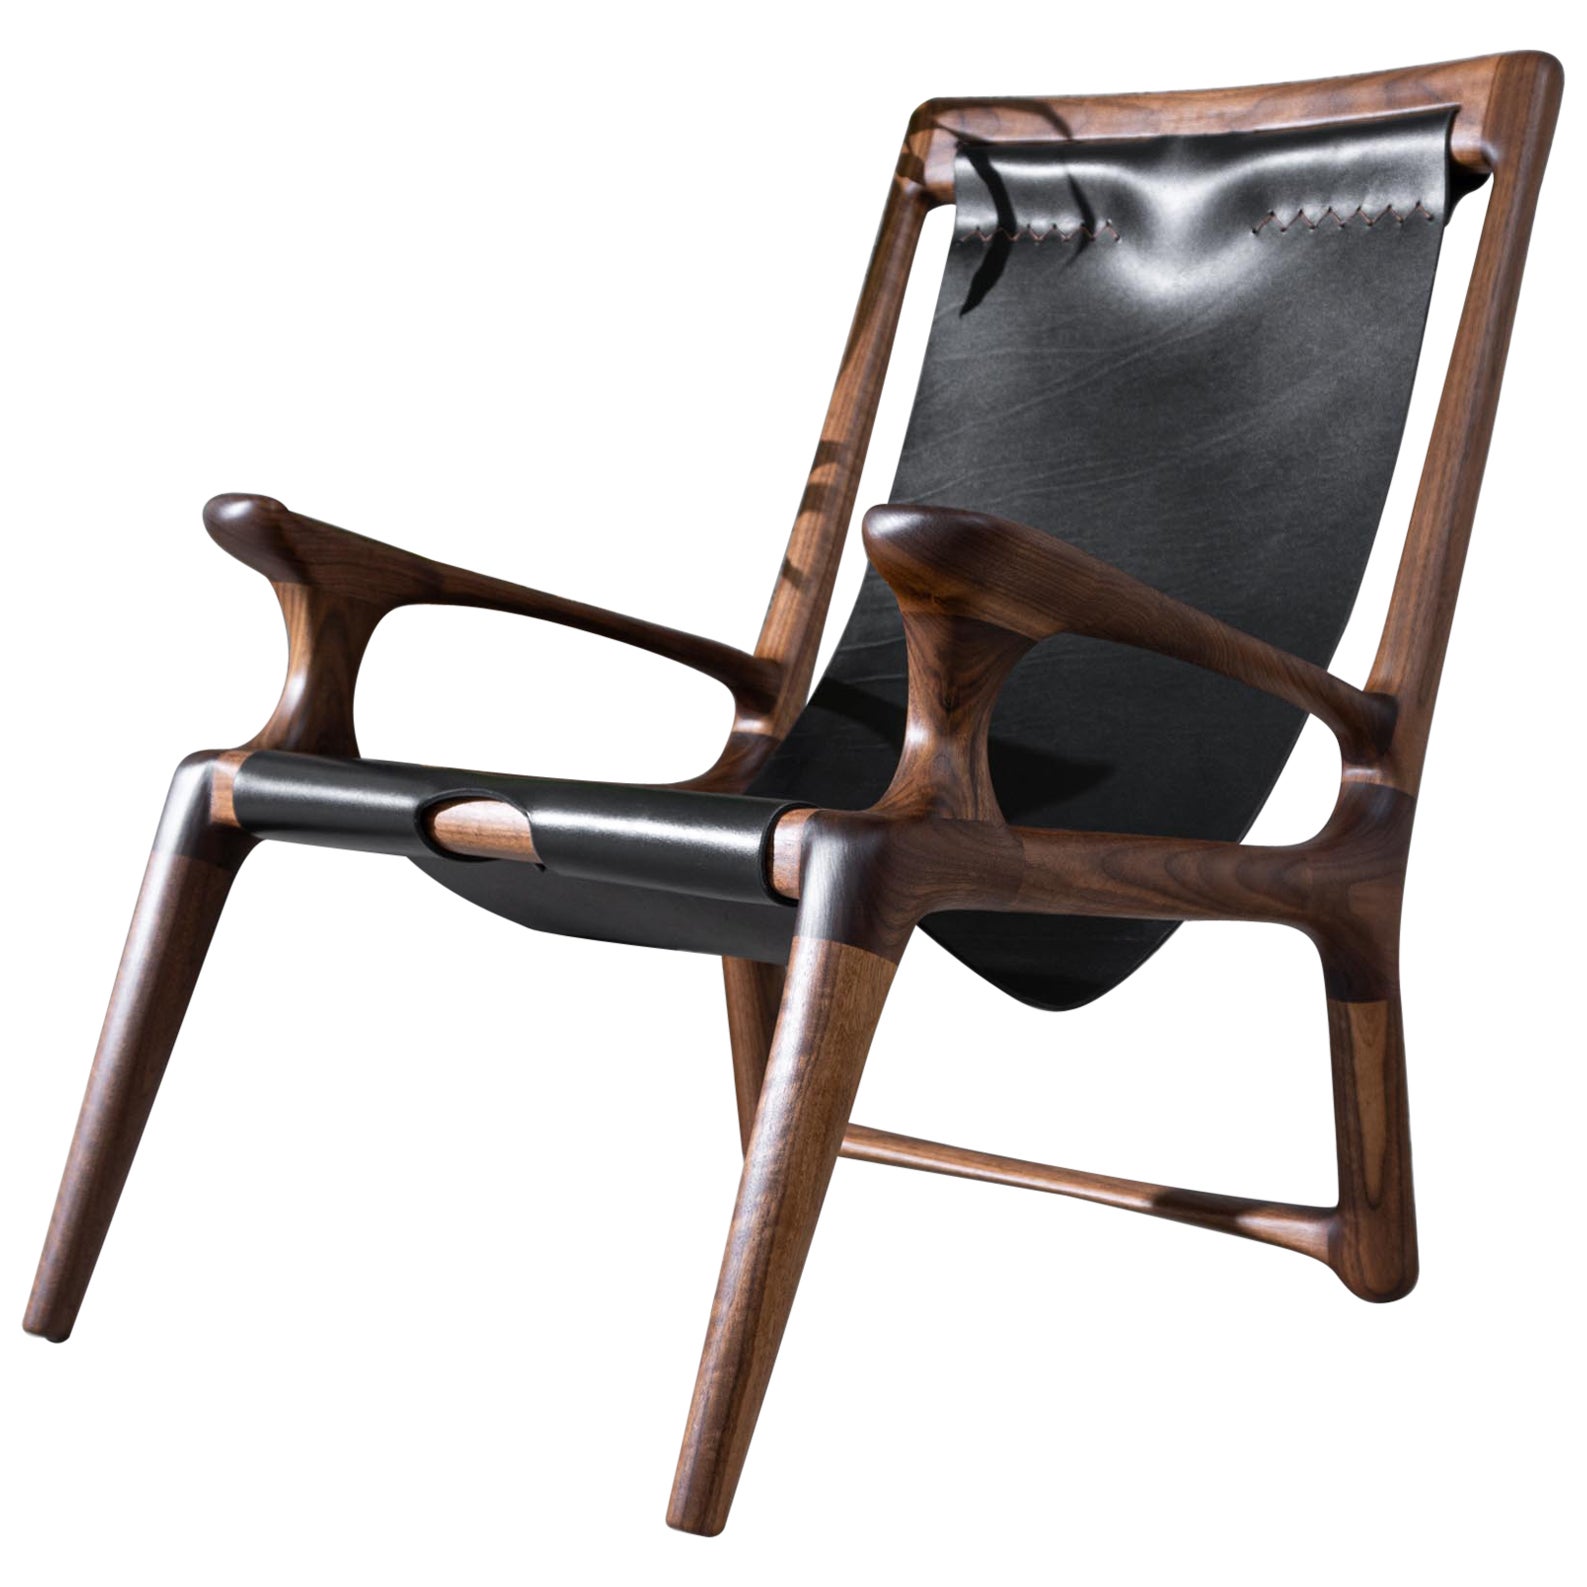 Walnut & Leather Sling Chair Mod 2 by Fernweh Woodworking For Sale